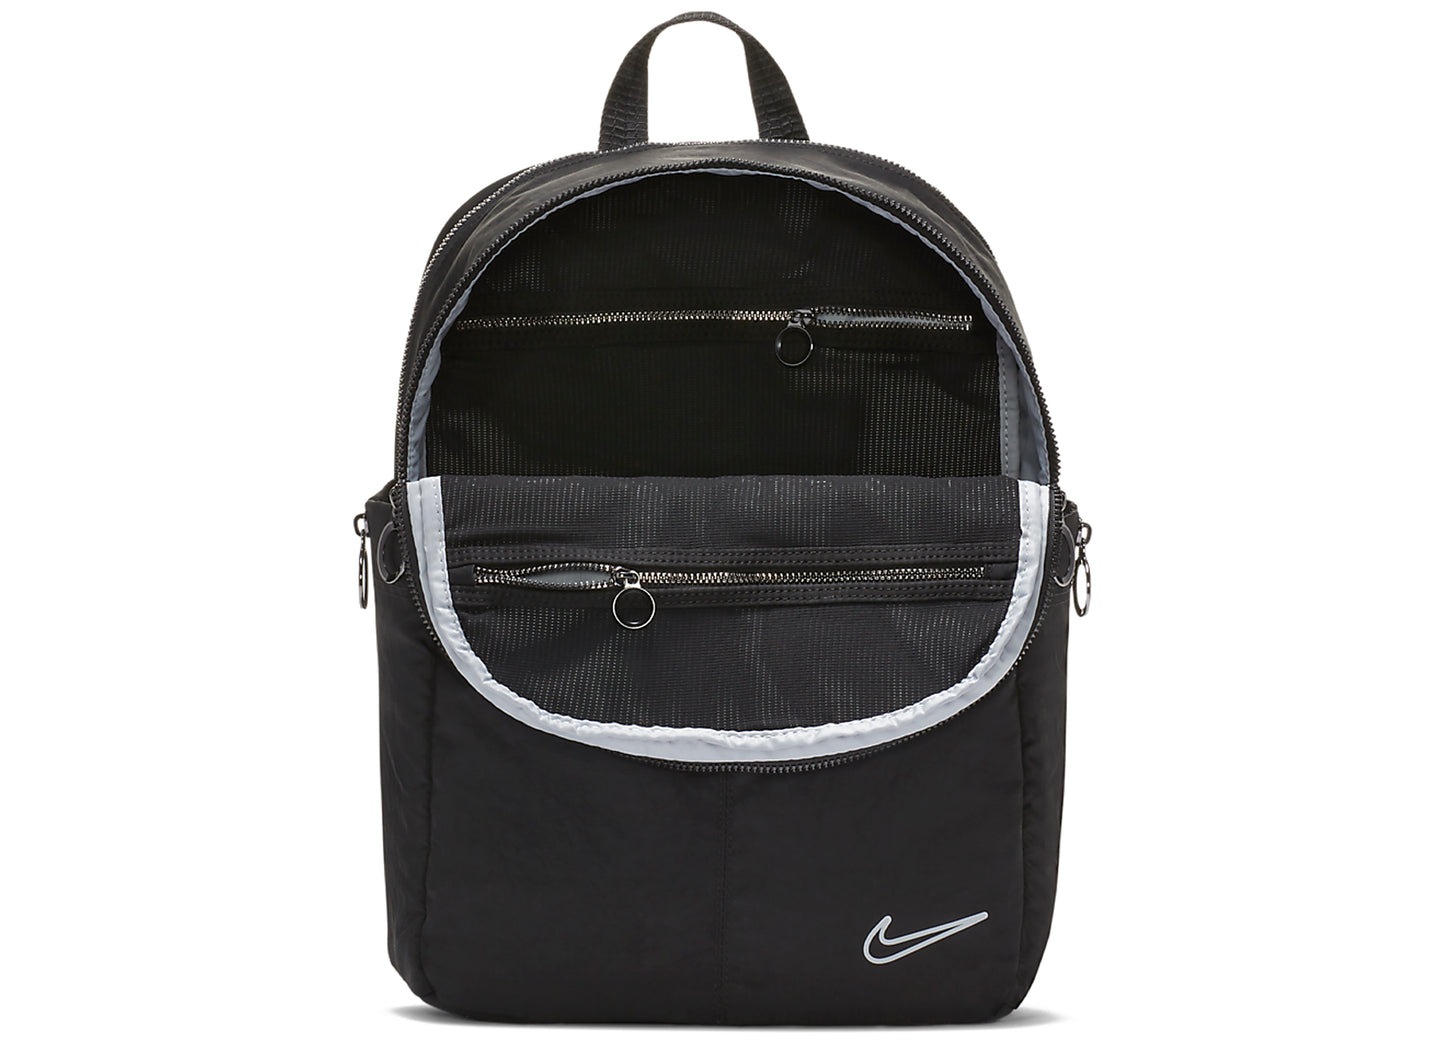 nike one luxe performance backpack｜TikTok Search